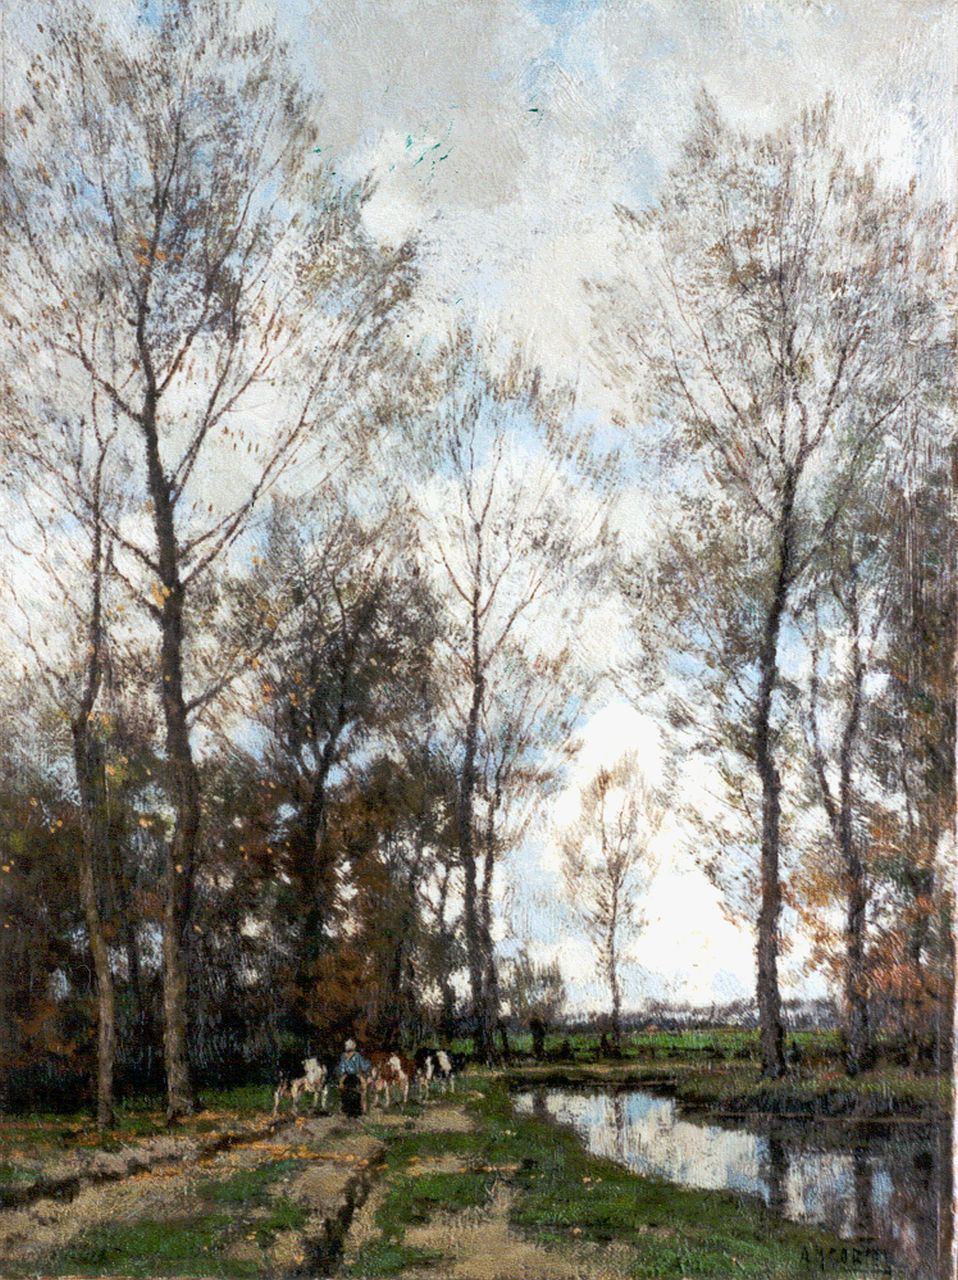 Gorter A.M.  | 'Arnold' Marc Gorter, Shepherdess with cattle in an autumn landscape, oil on canvas 50.8 x 37.8 cm, signed l.r.